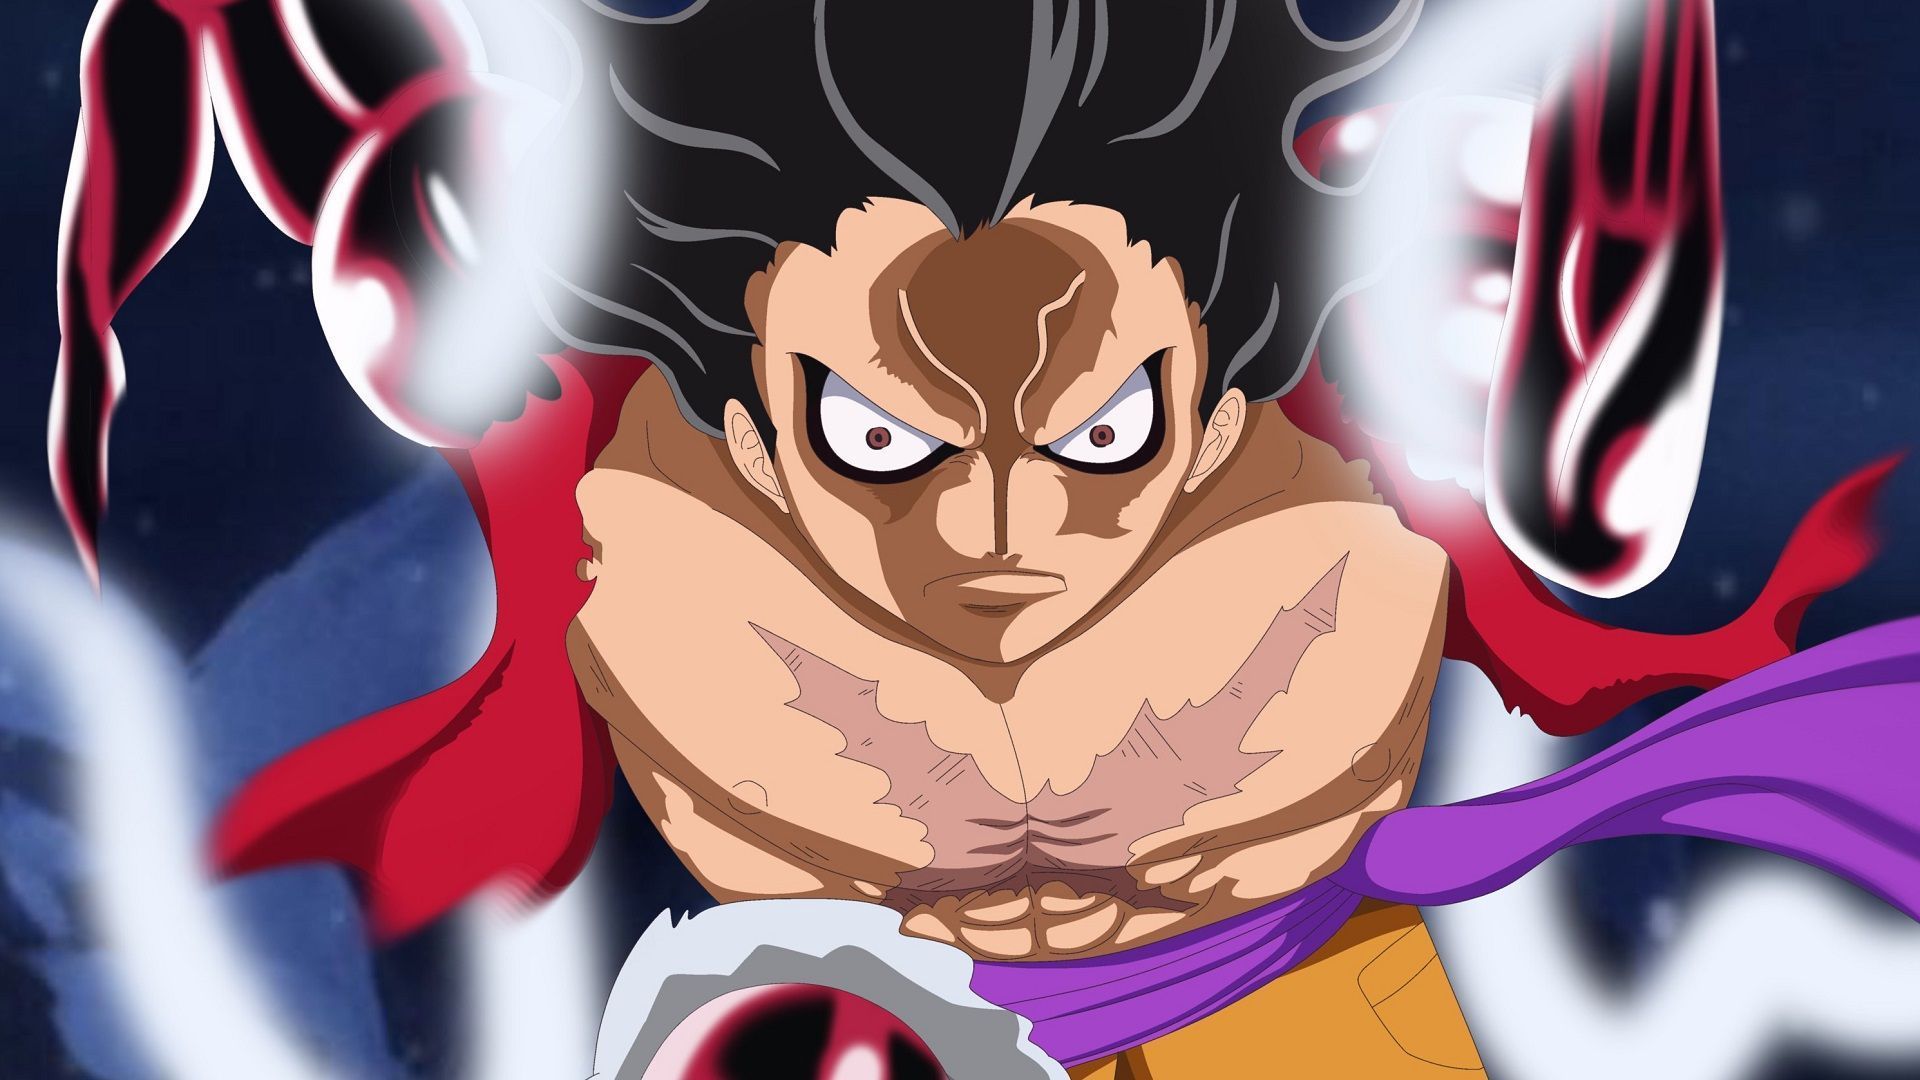 Luffy in his Gear 4 Snakeman form (Image via Toei Animation, One Piece)